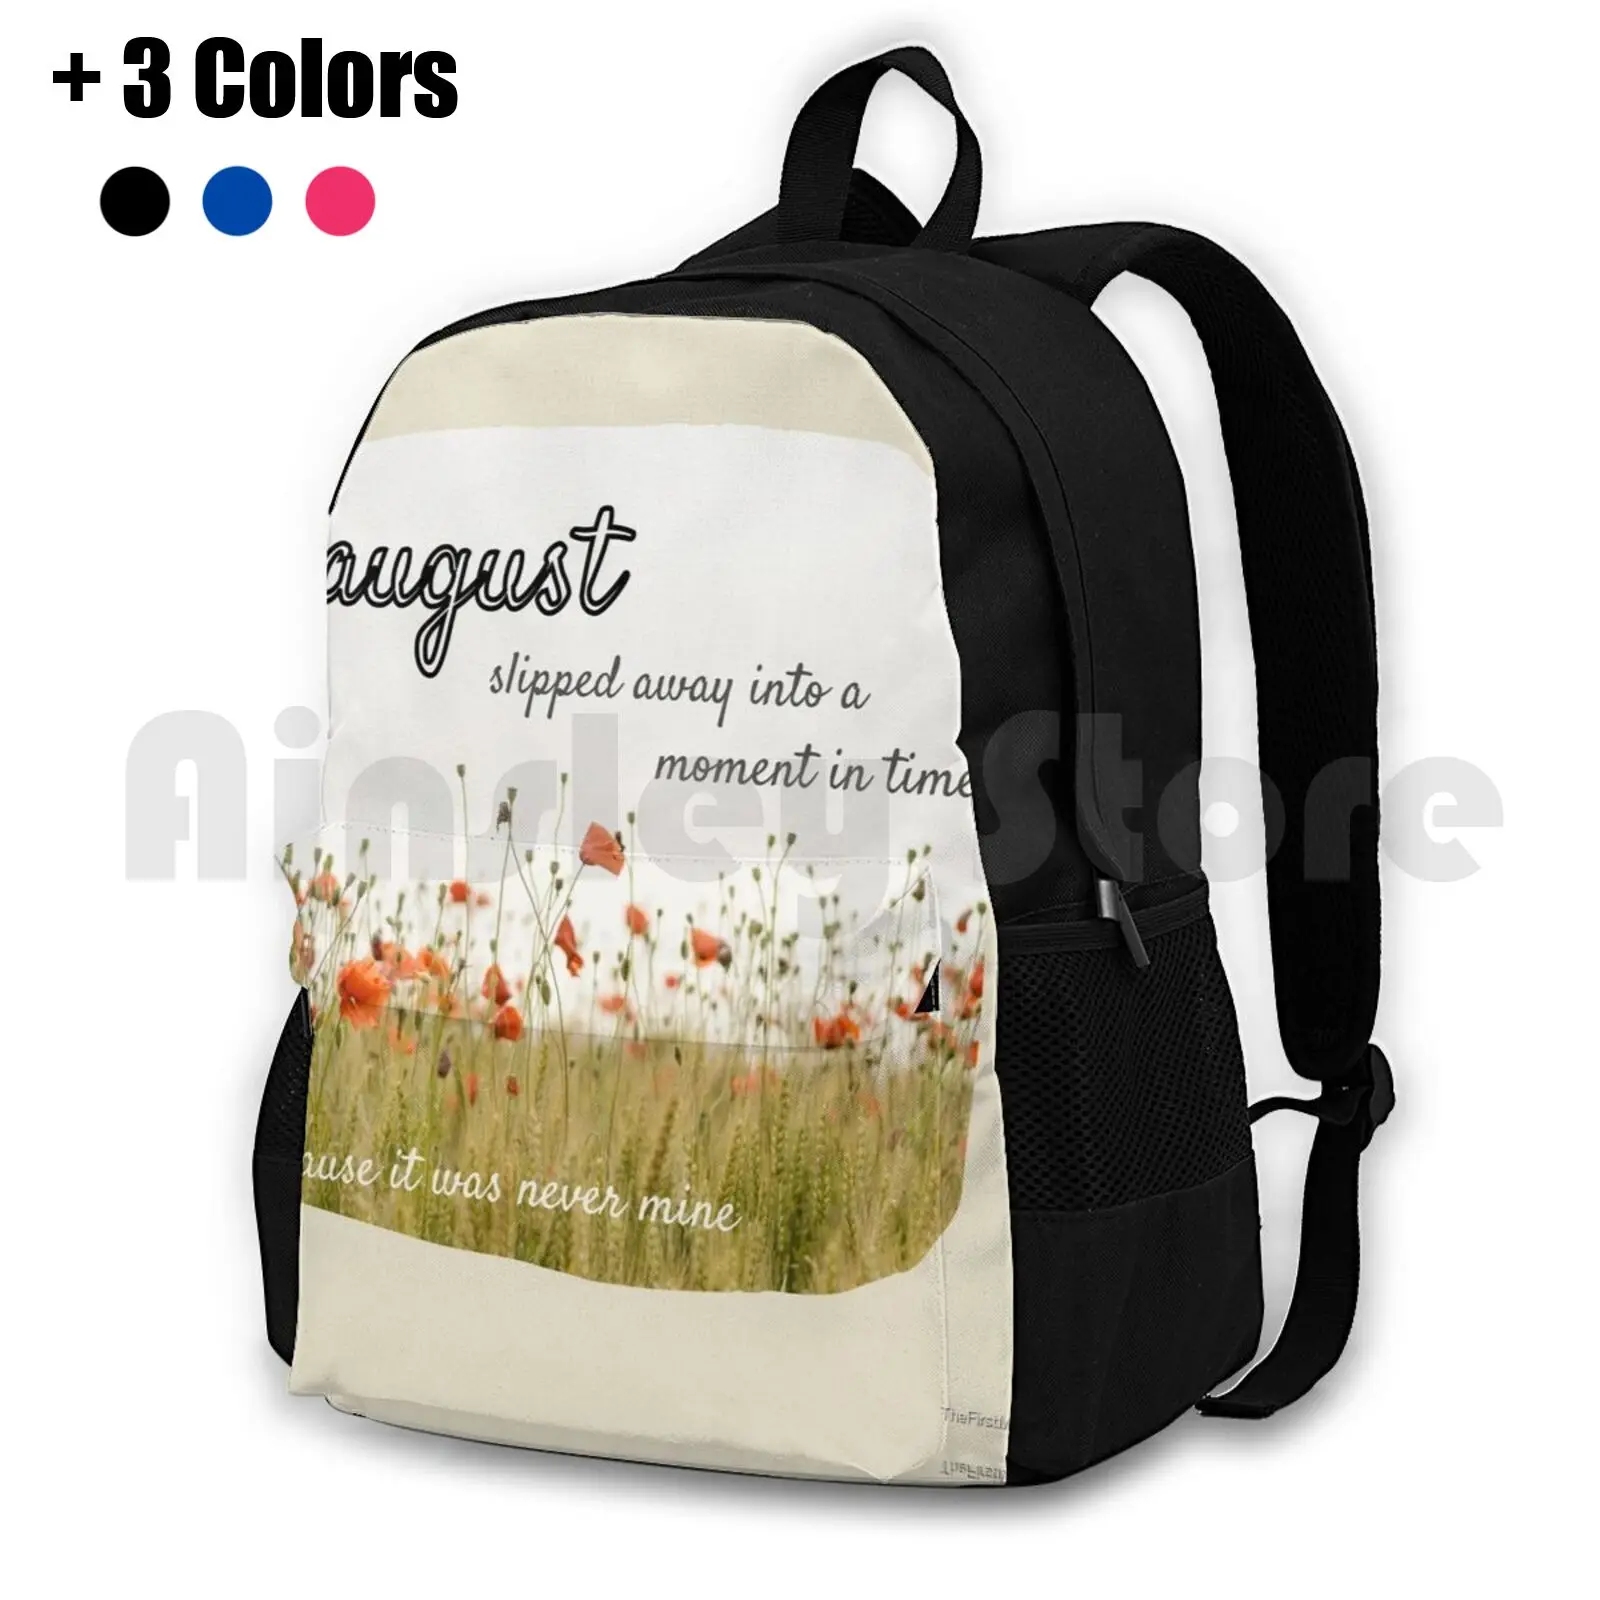 

August Folklore Lyrics Slipped Away Moment In Time Outdoor Hiking Backpack Waterproof Camping Travel Folklore Folklore Folklore